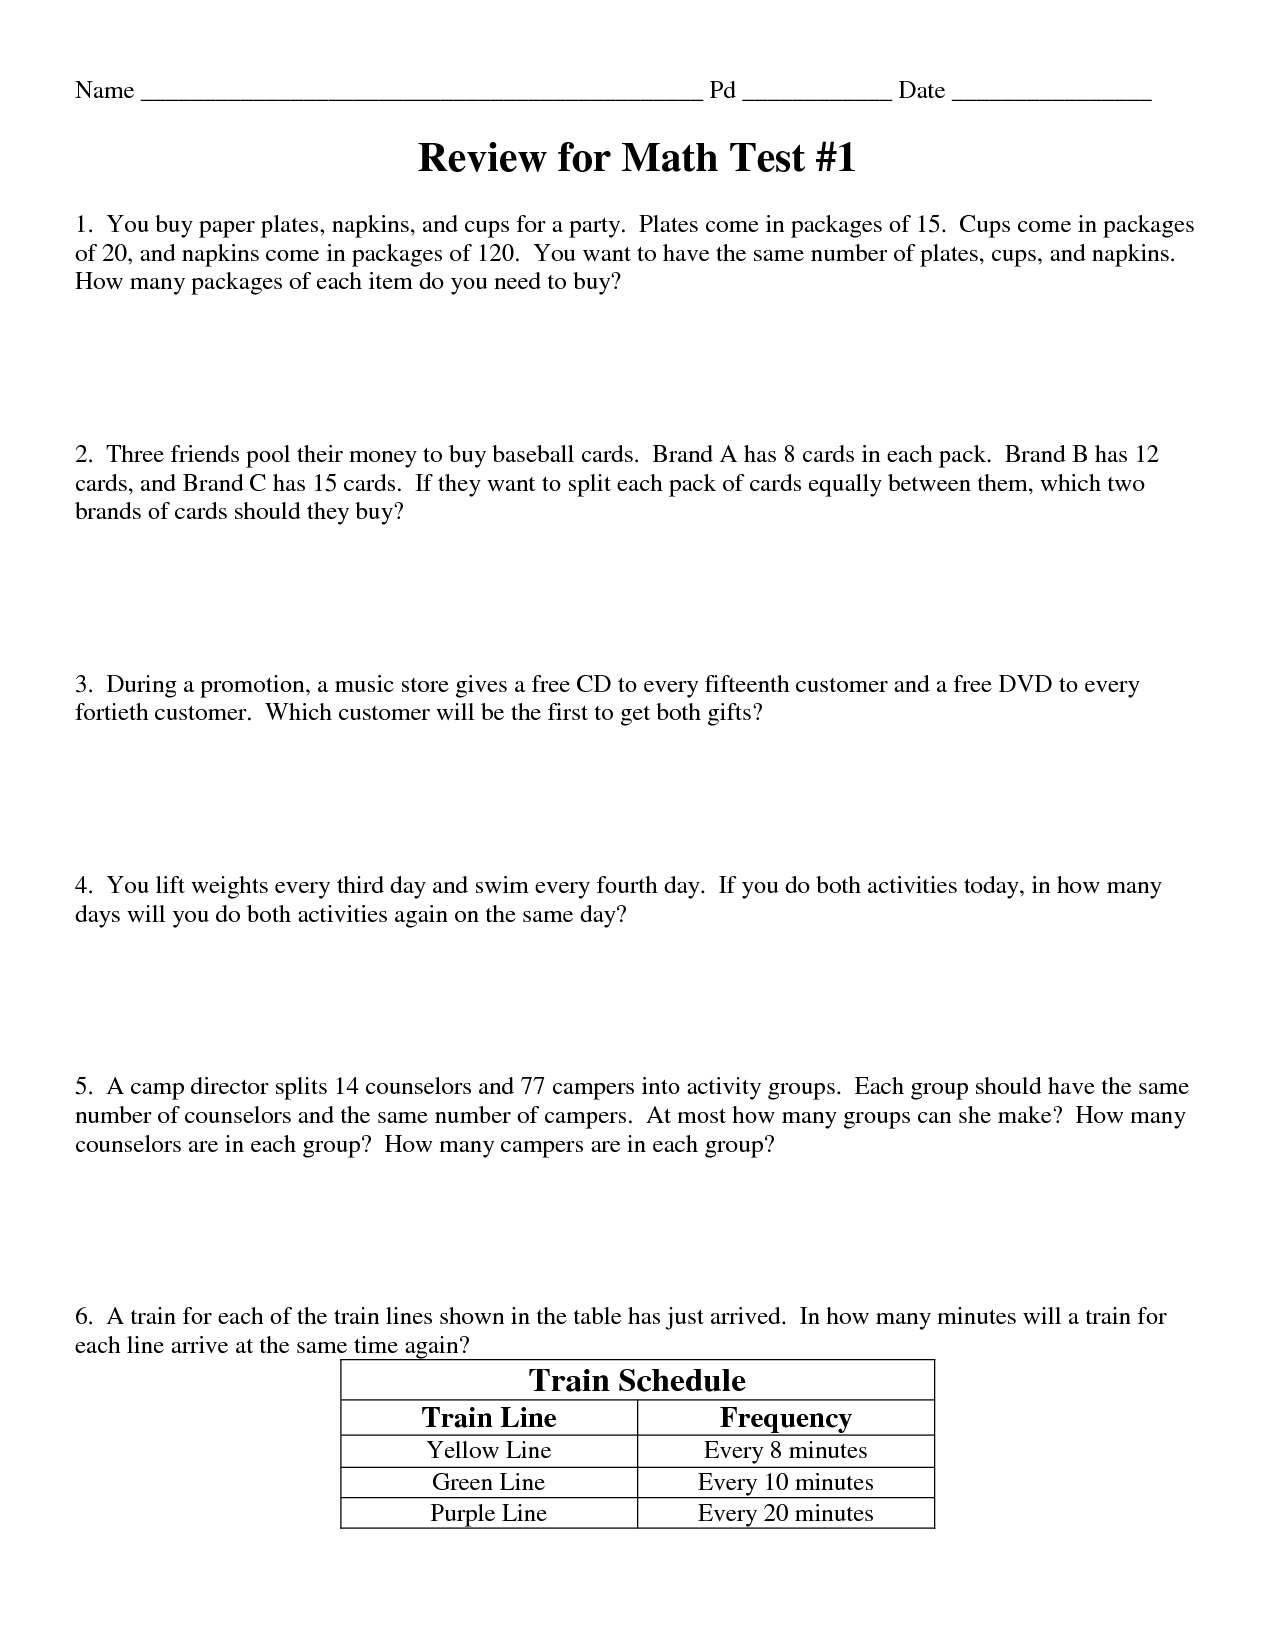 11-best-images-of-printable-greatest-common-factor-worksheets-least